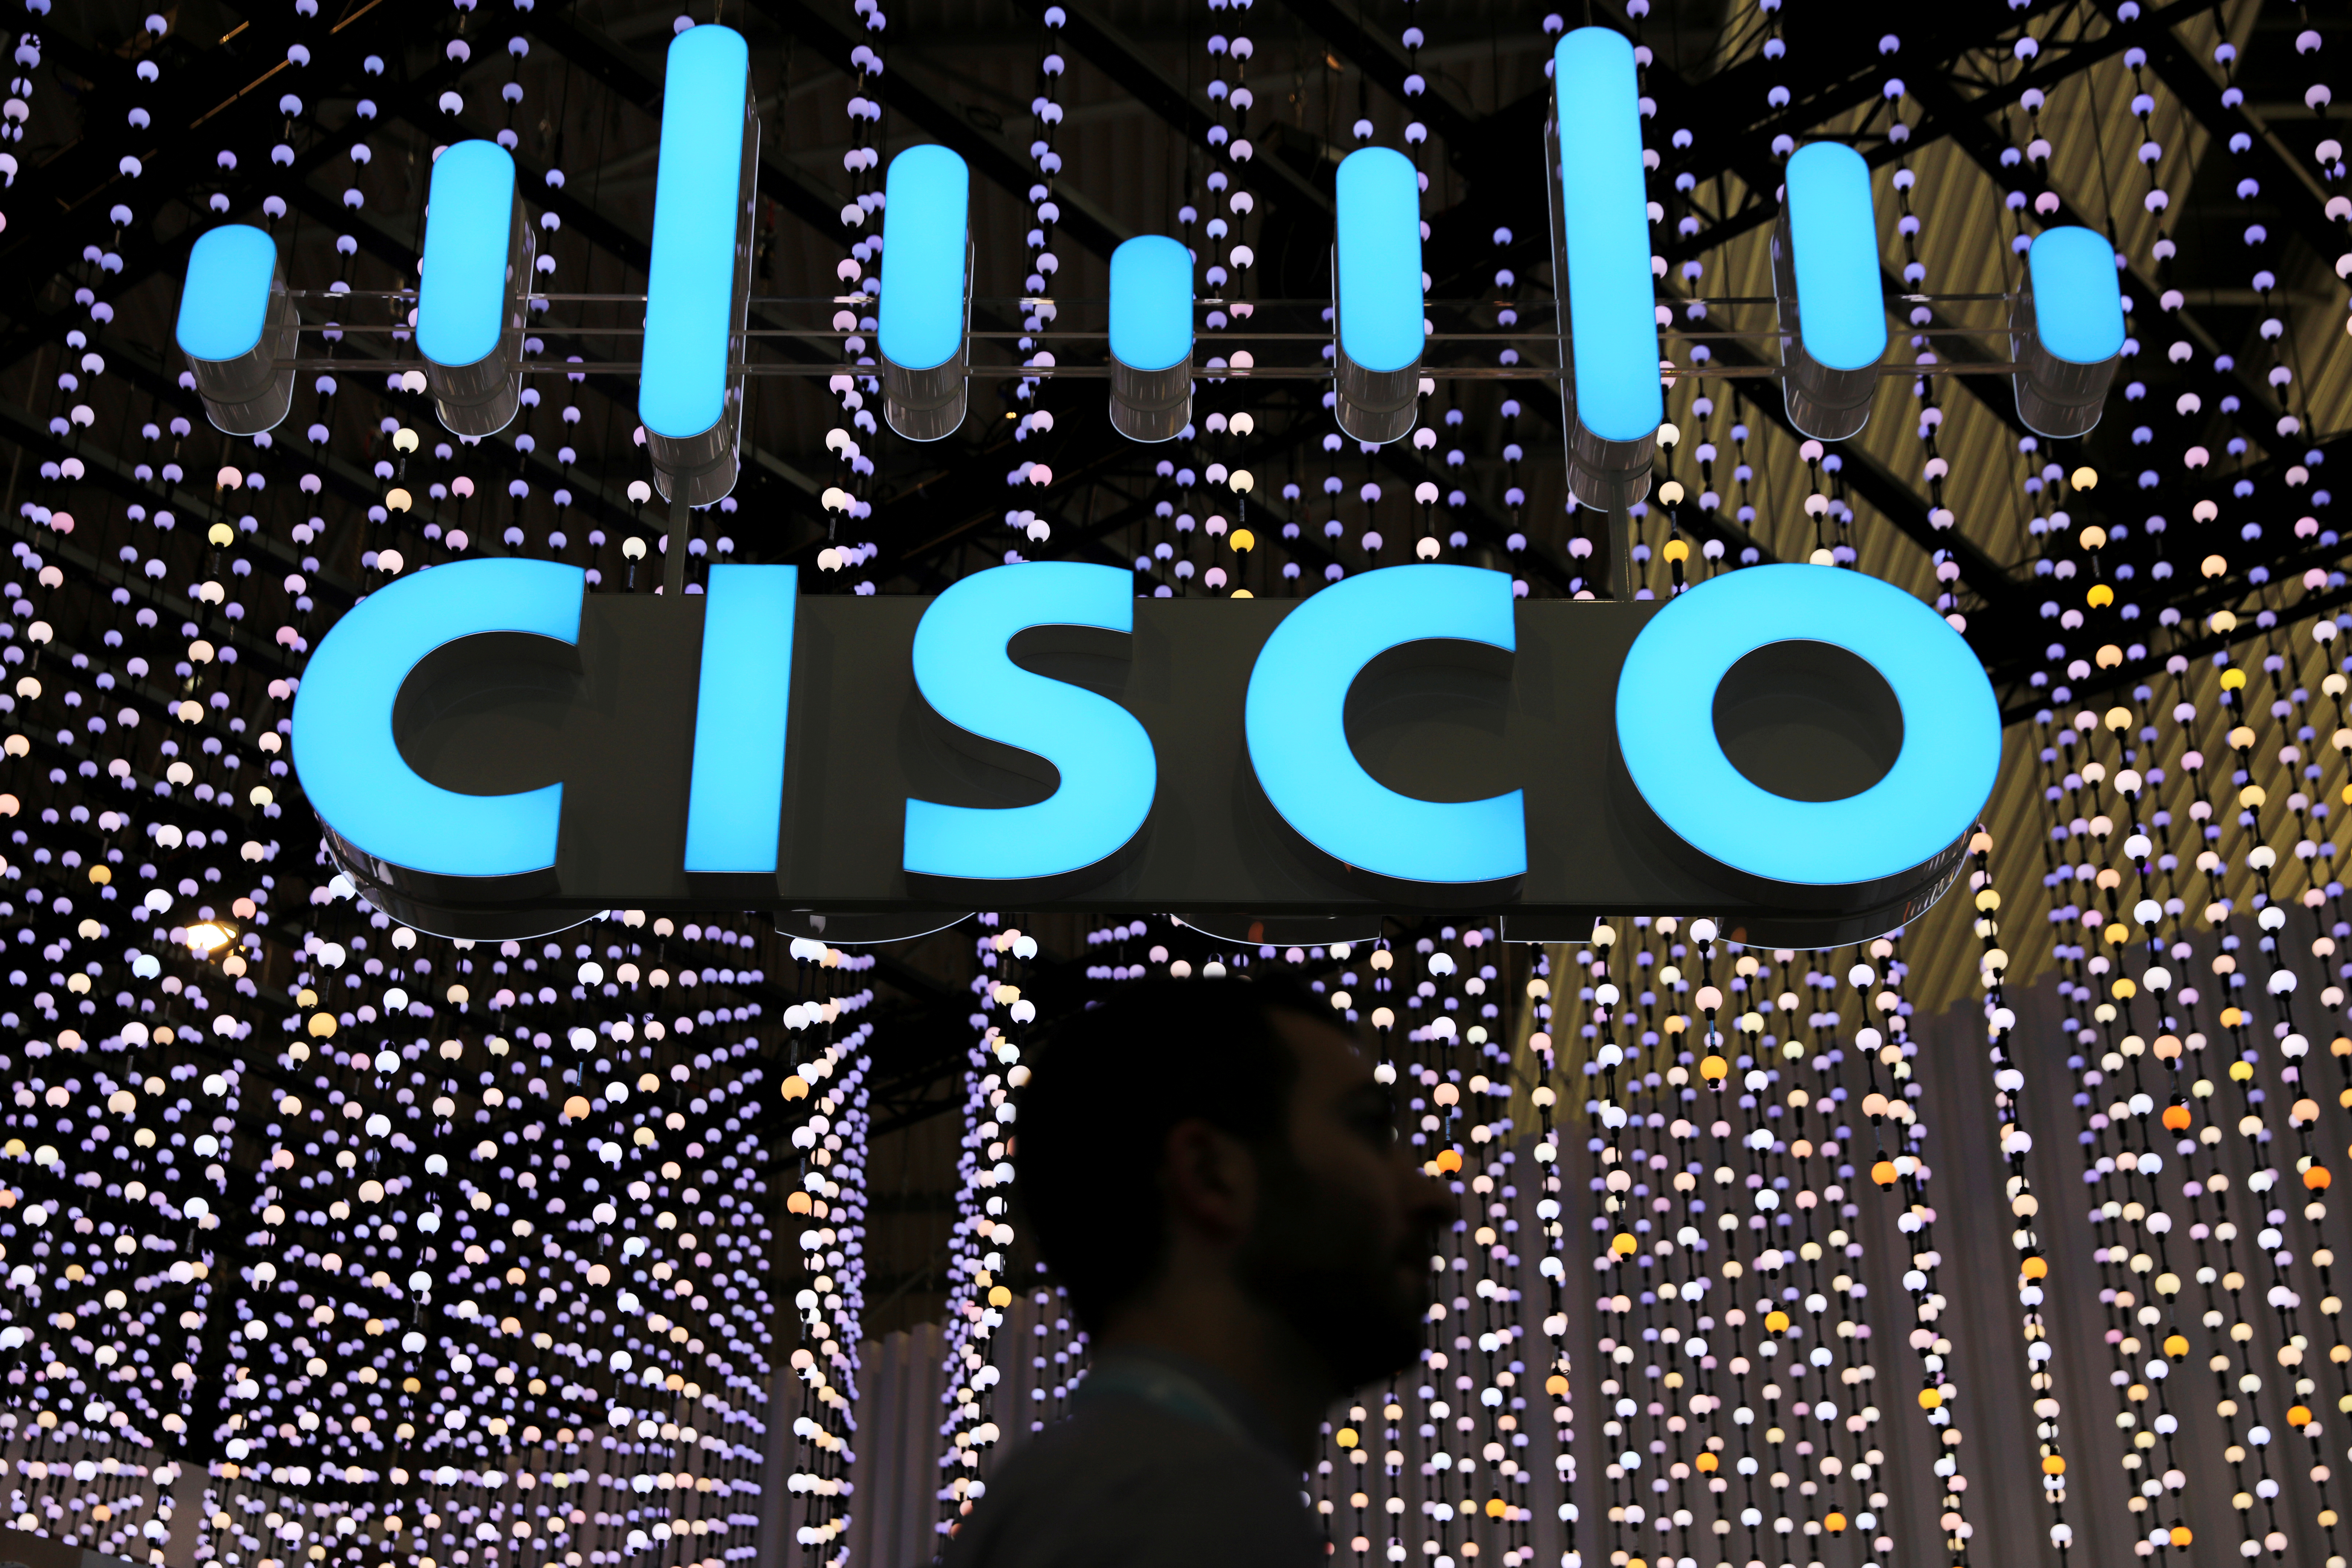 A man passes under a Cisco sign at the Mobile World Congress in Barcelona